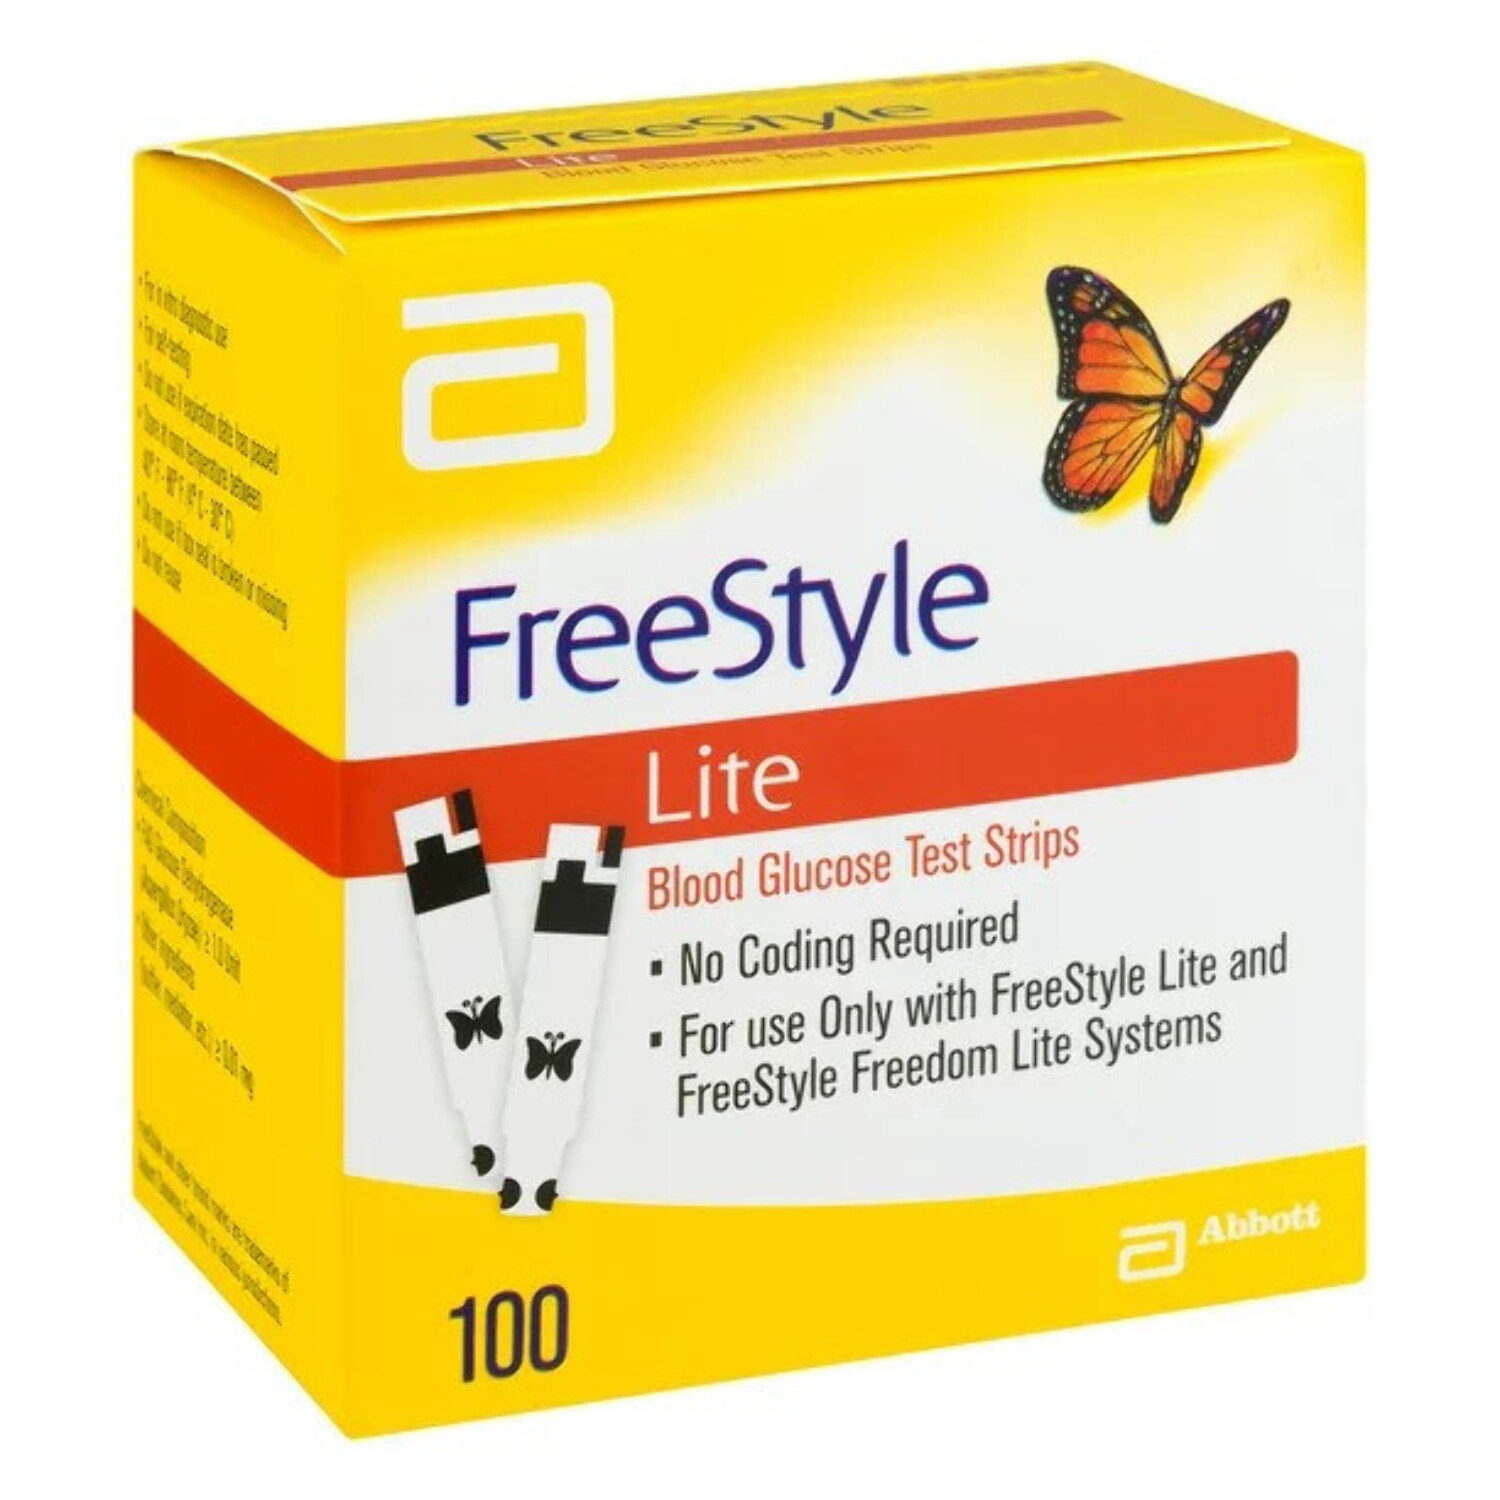 FreeStyle Lite Blood Glucose Test Strips, 100 Ct - image 1 of 4